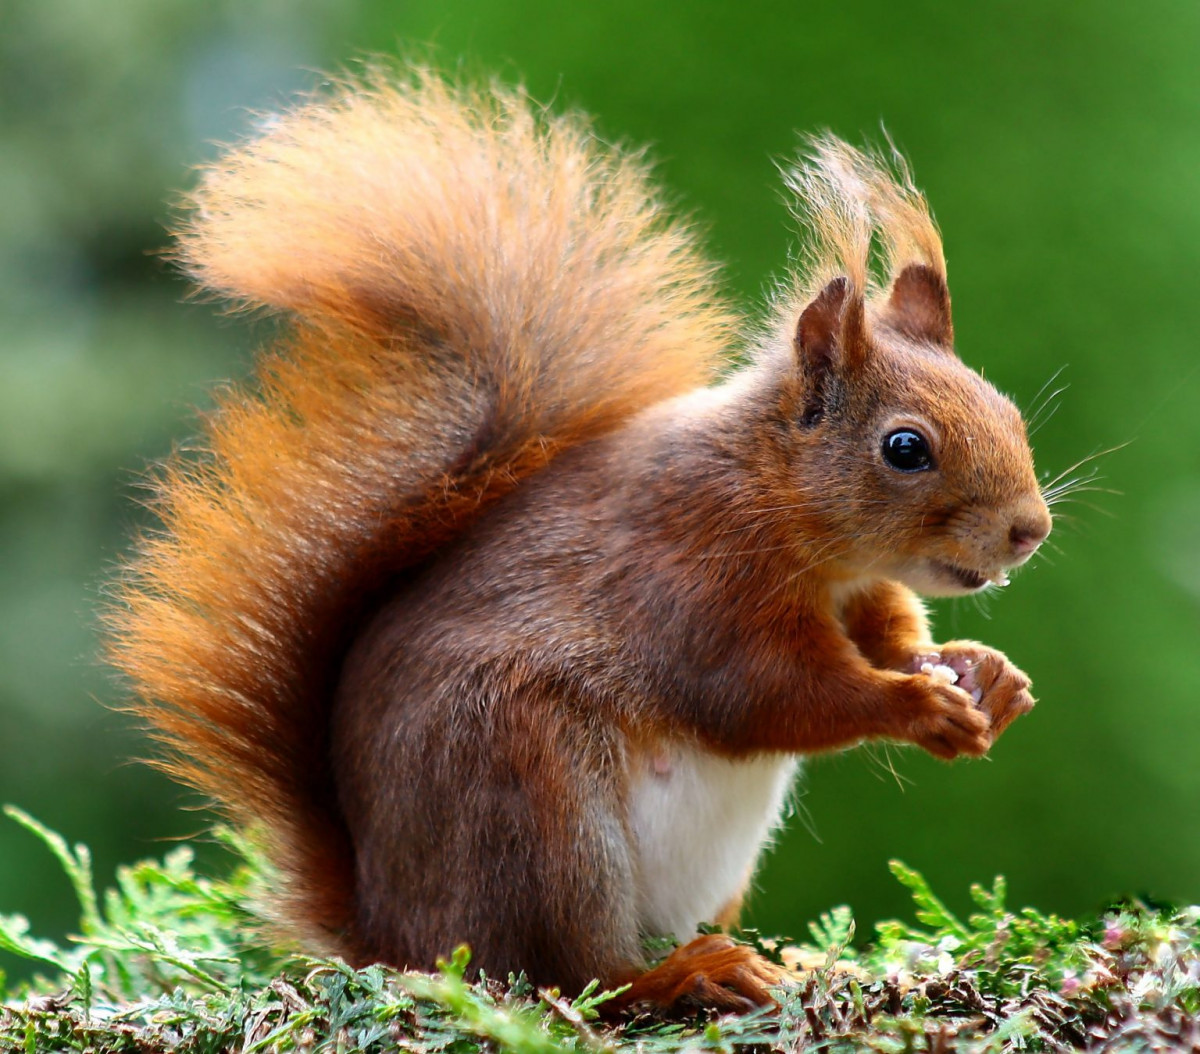 A red squirrel with a fluffy tail stands on a mossy surface, eating with its tiny paws.